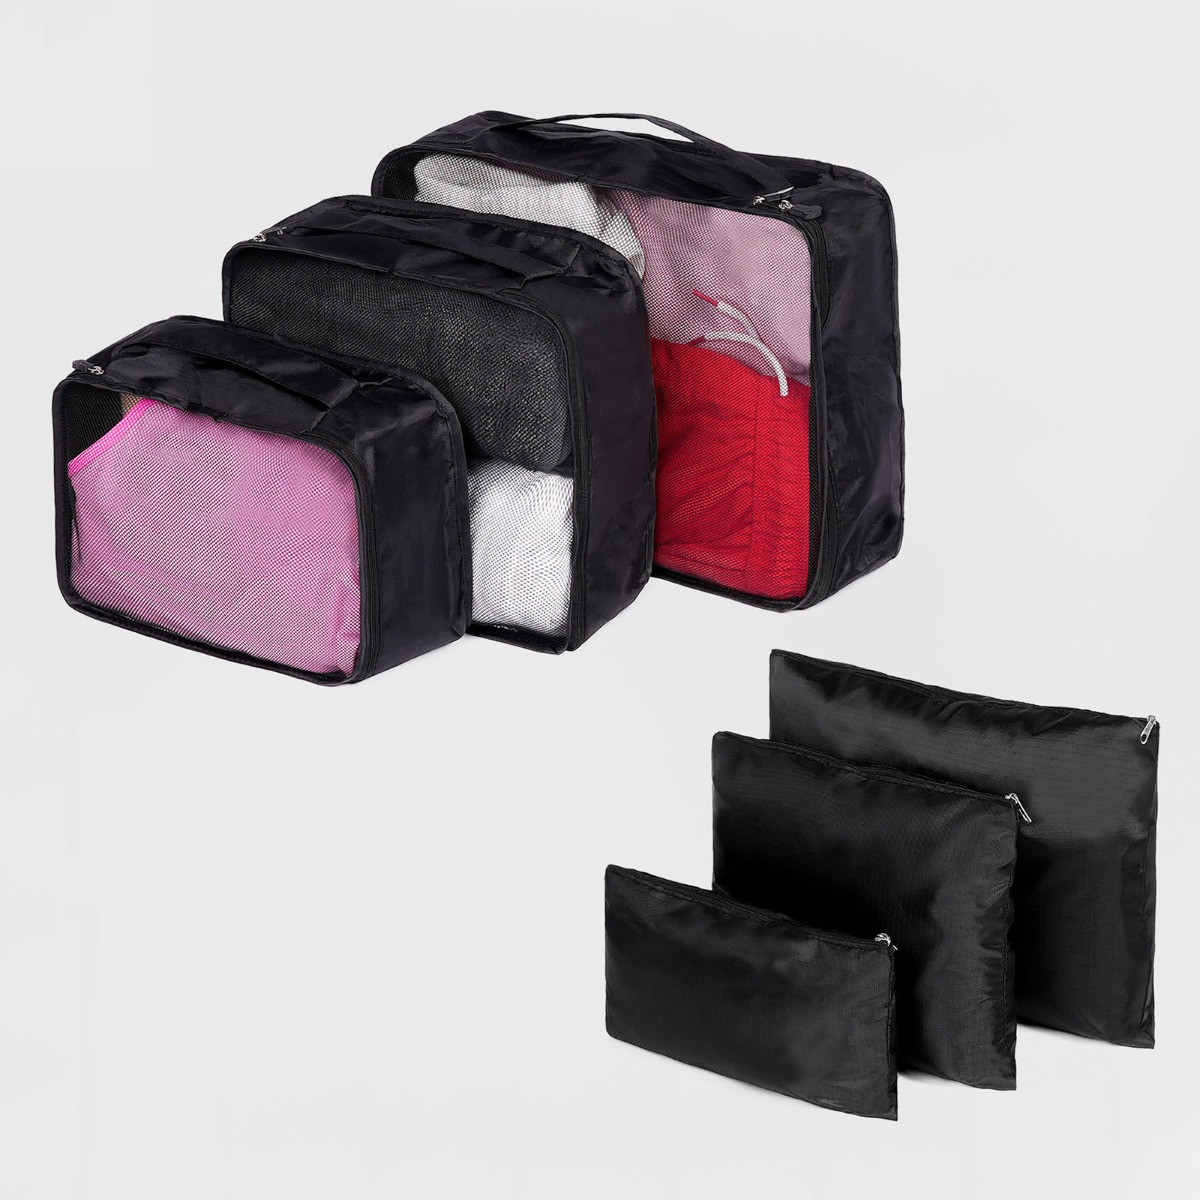 OHS Travel Packing Cube And Bag Set, Black - 6 Piece>